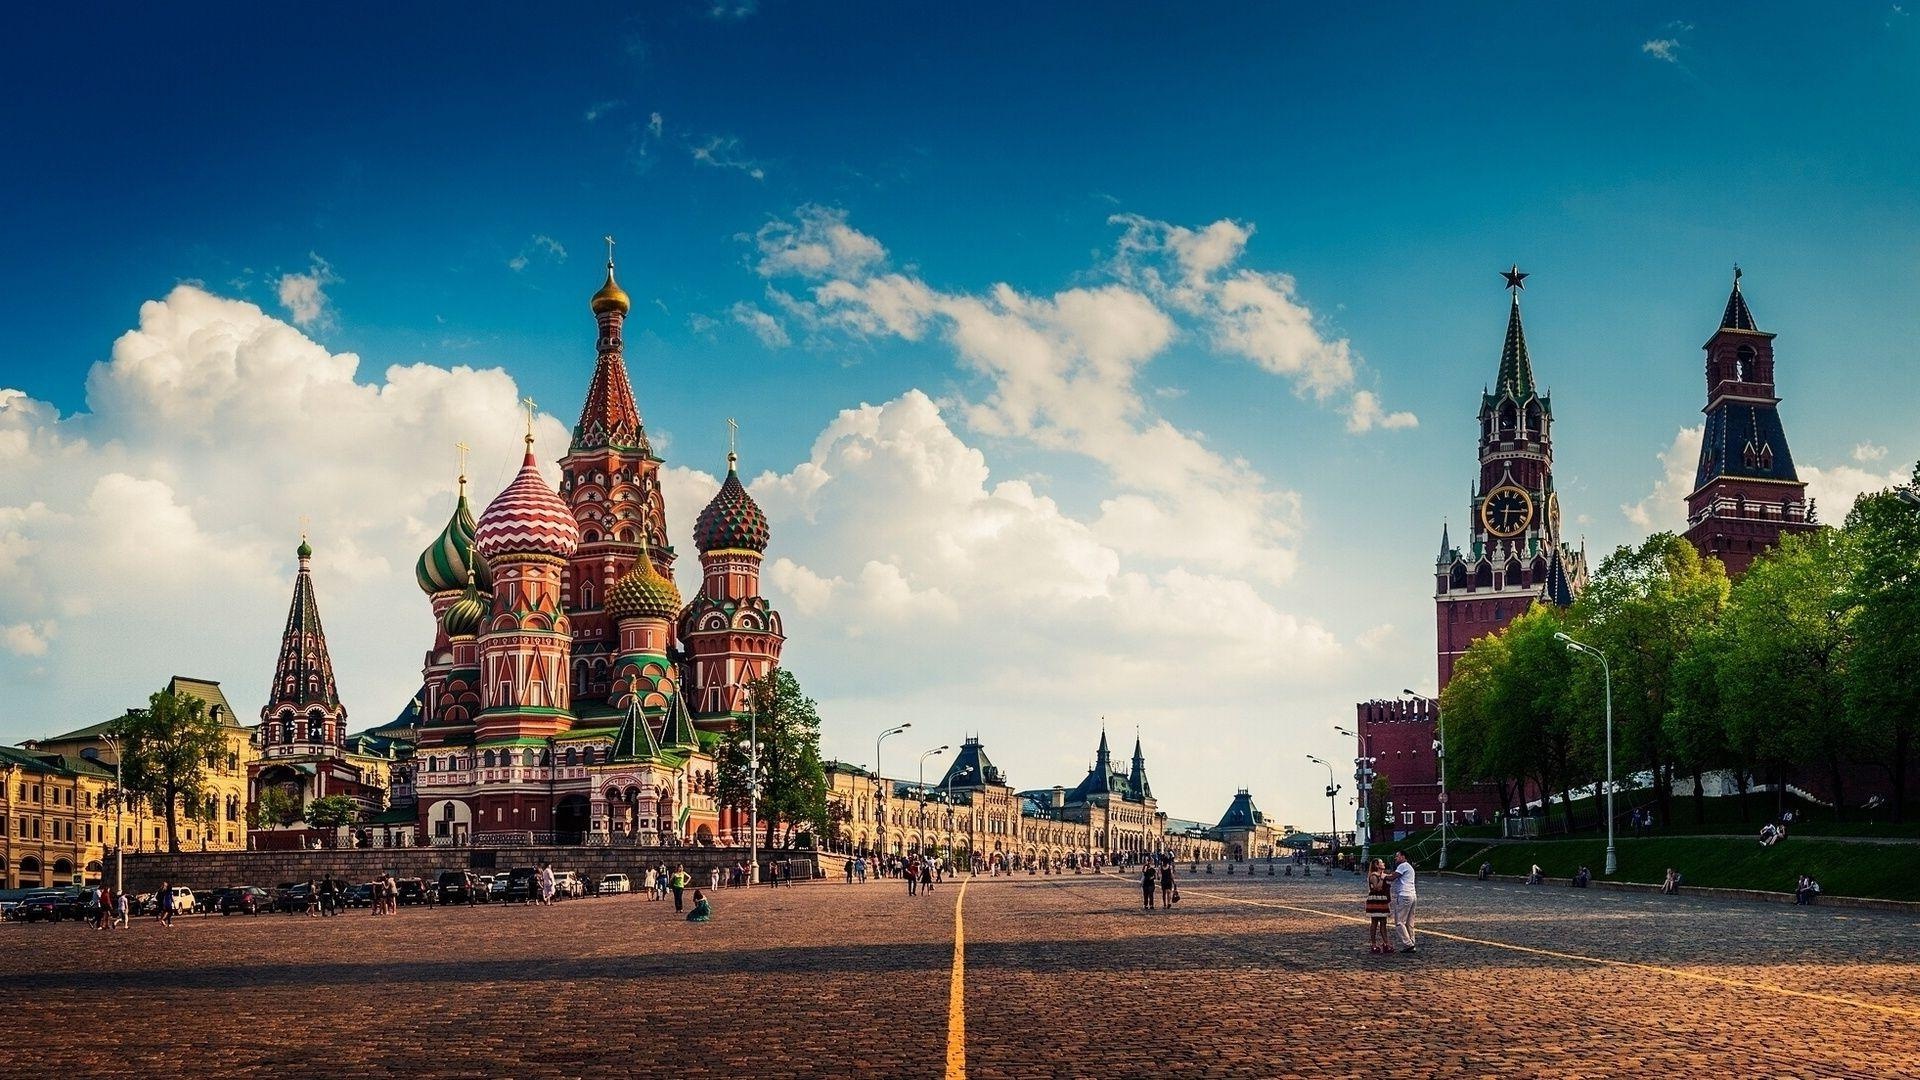 City Square: The Red Square, Saint Basil's Cathedral, Spasskaya Tower, Kremlin, Heart of Moscow, Russia. 1920x1080 Full HD Background.